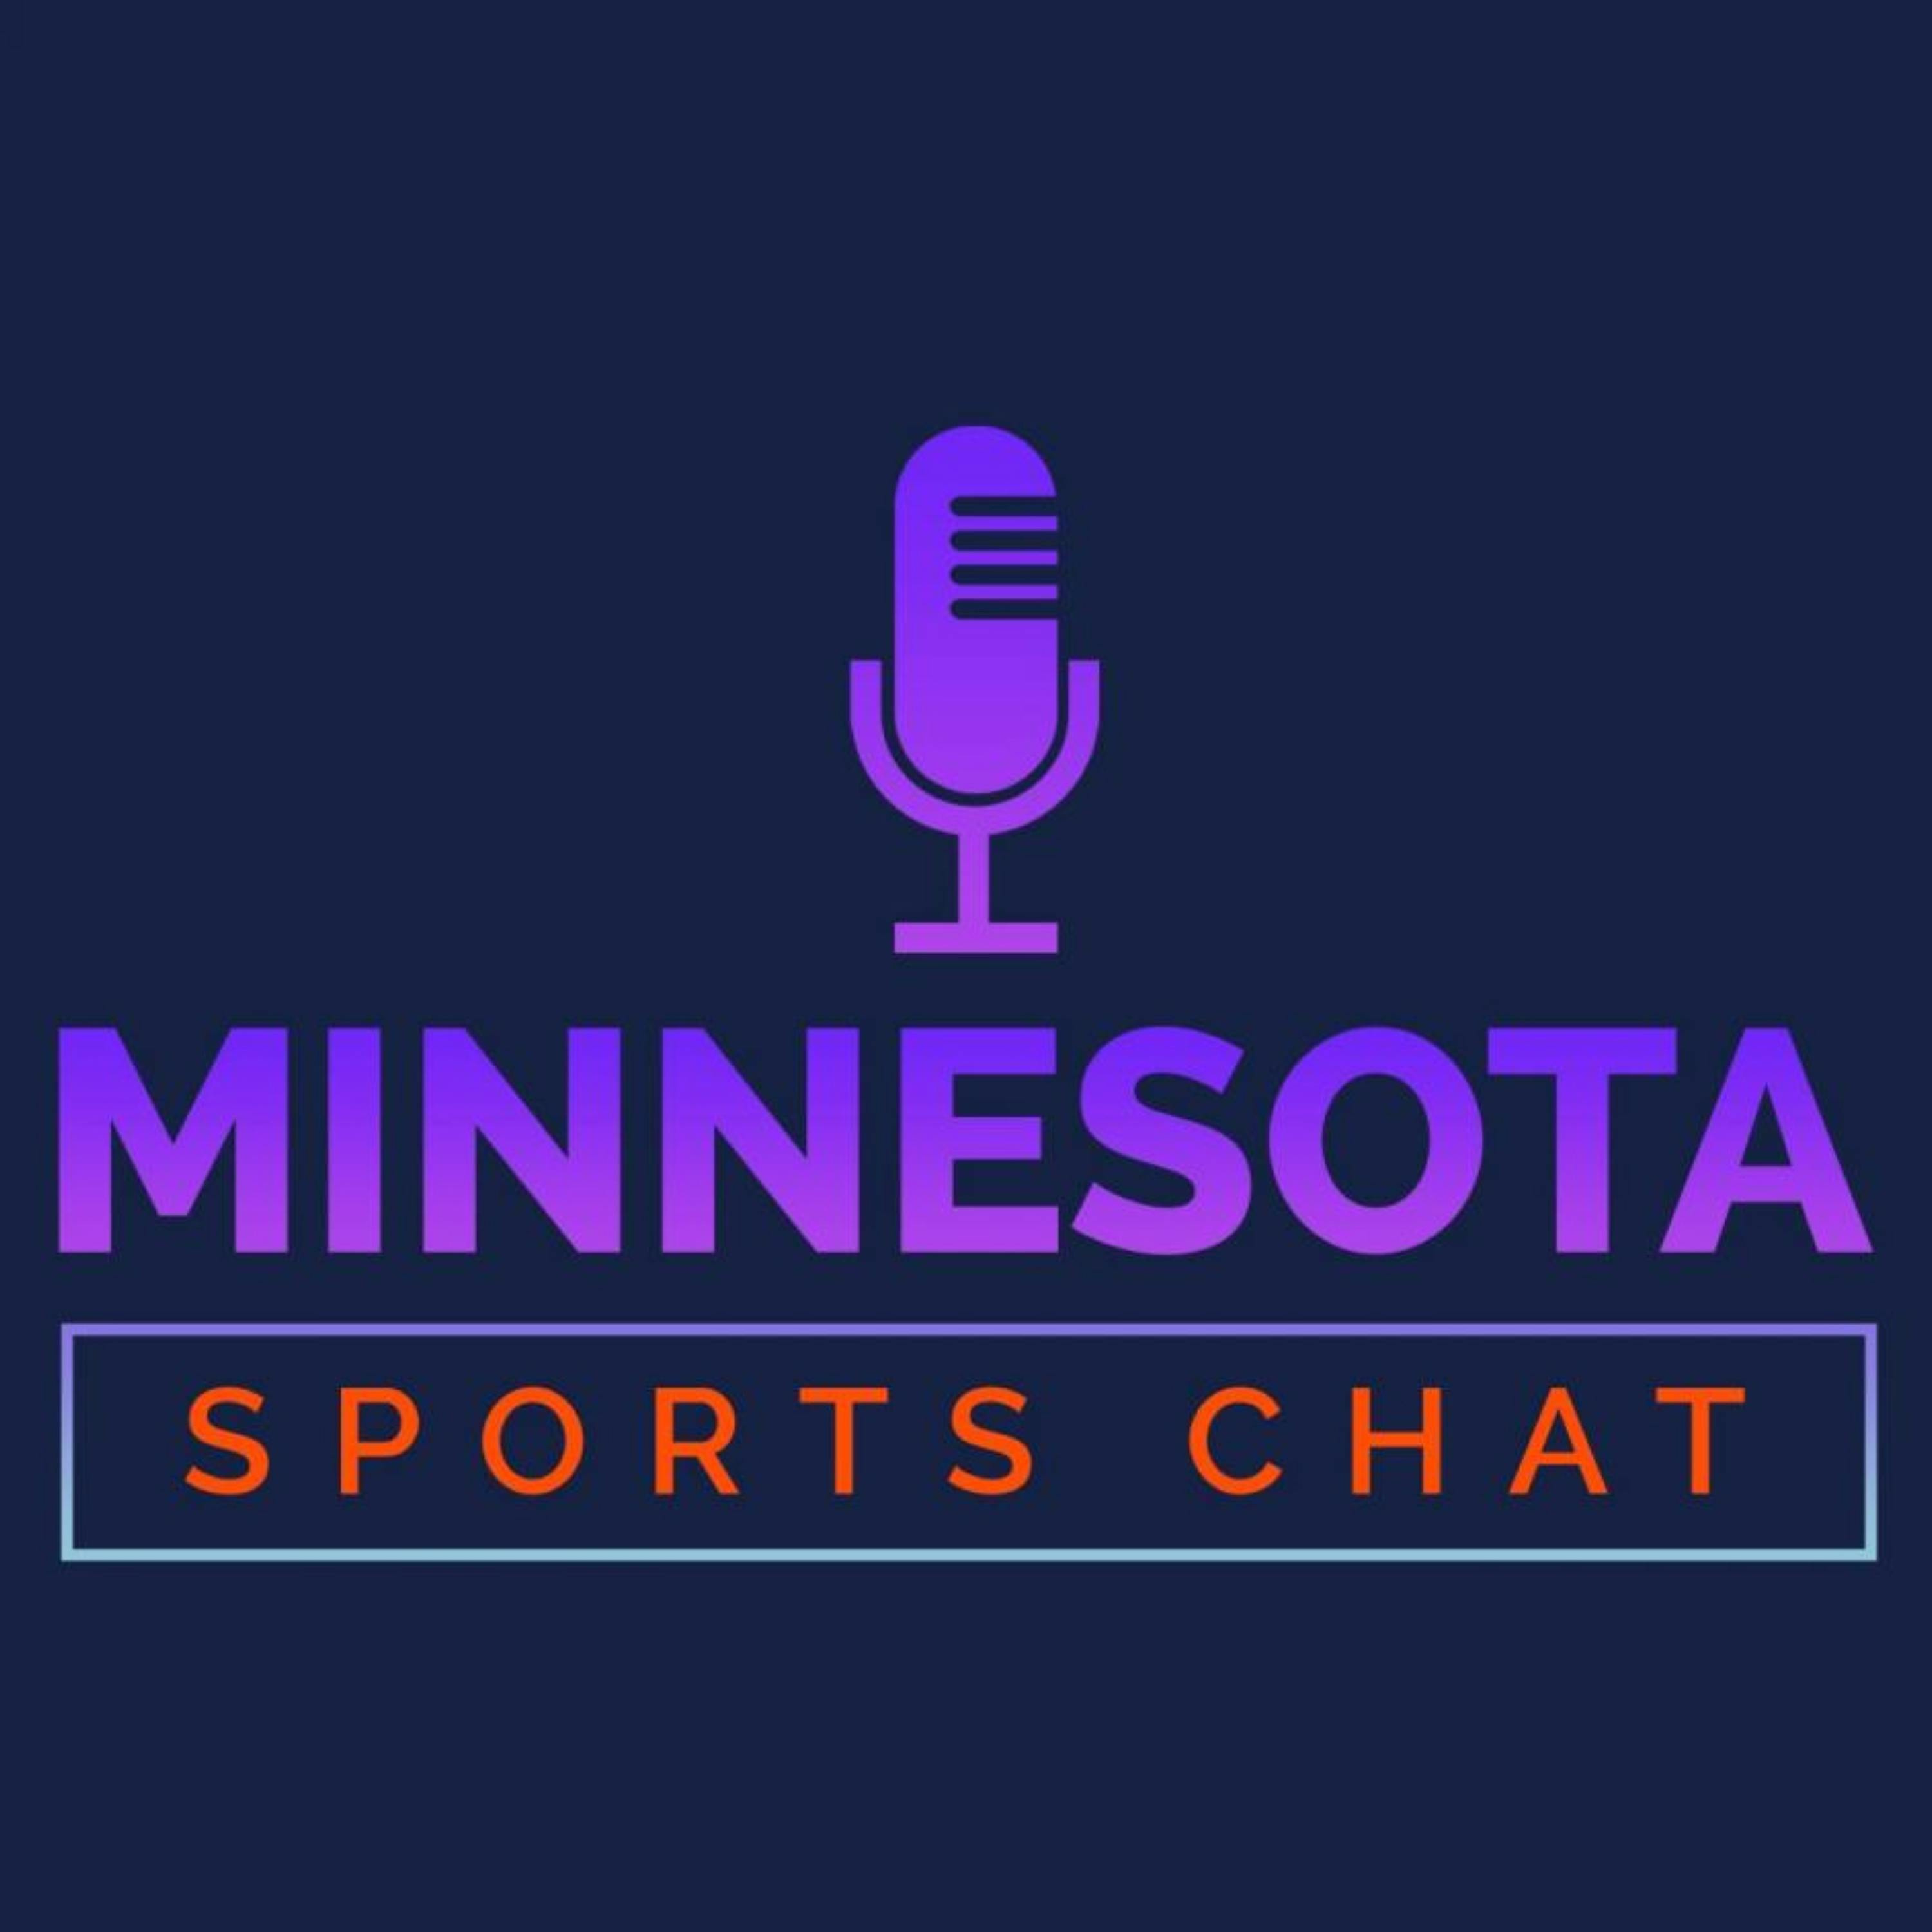 MINNESOTA SPORTS CHAT: Has Karl-Anthony Towns changed the game of basketball? - Edition #169 (NOT 170)